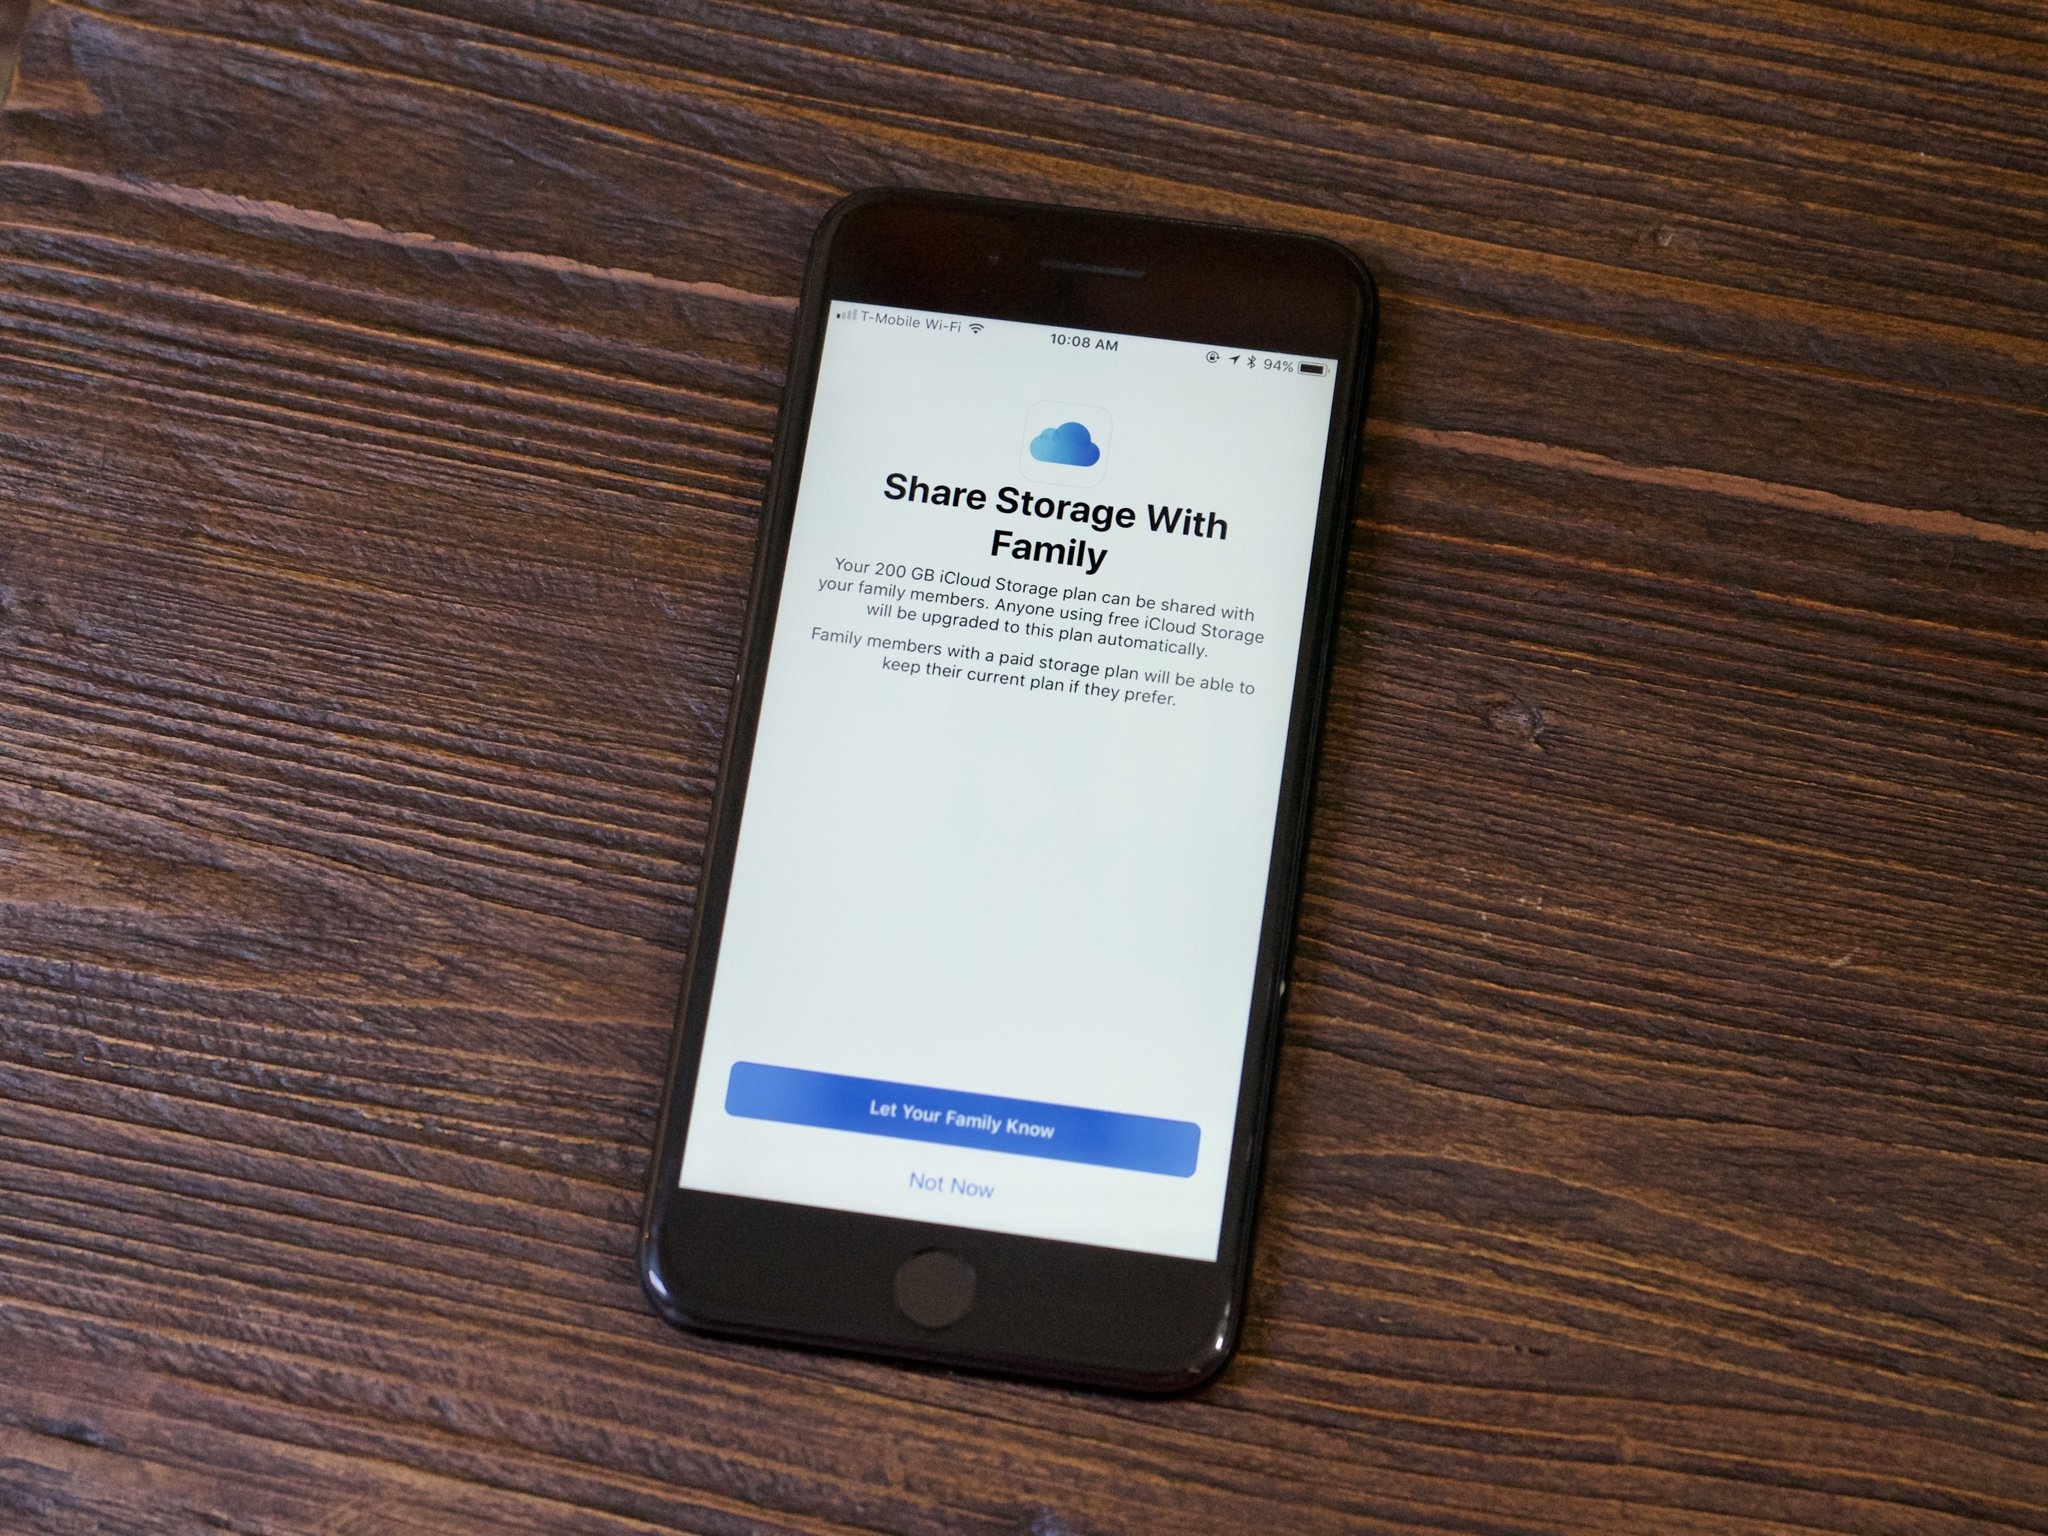 How to add a family member to a shared iCloud storage plan in iOS 11